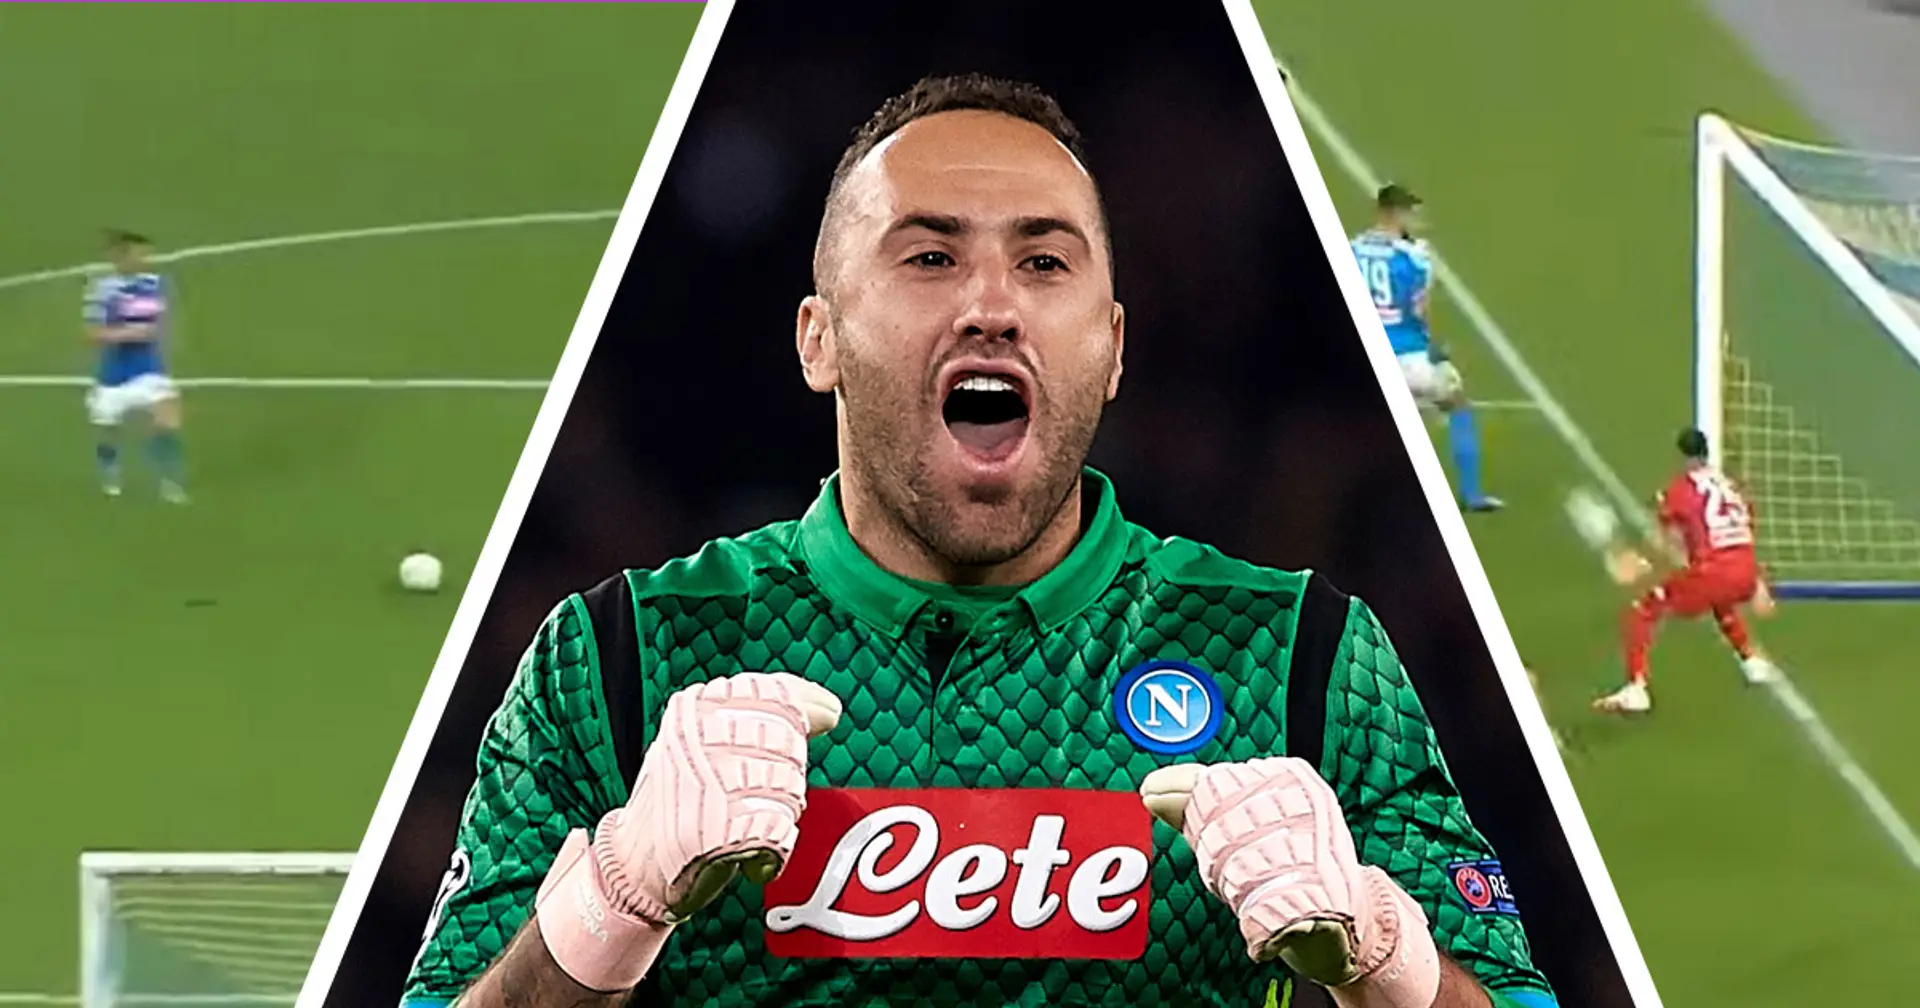 Ex-Gunner Ospina plays huge role in Italy's first post-lockdown goals: analysed in 7 pictures